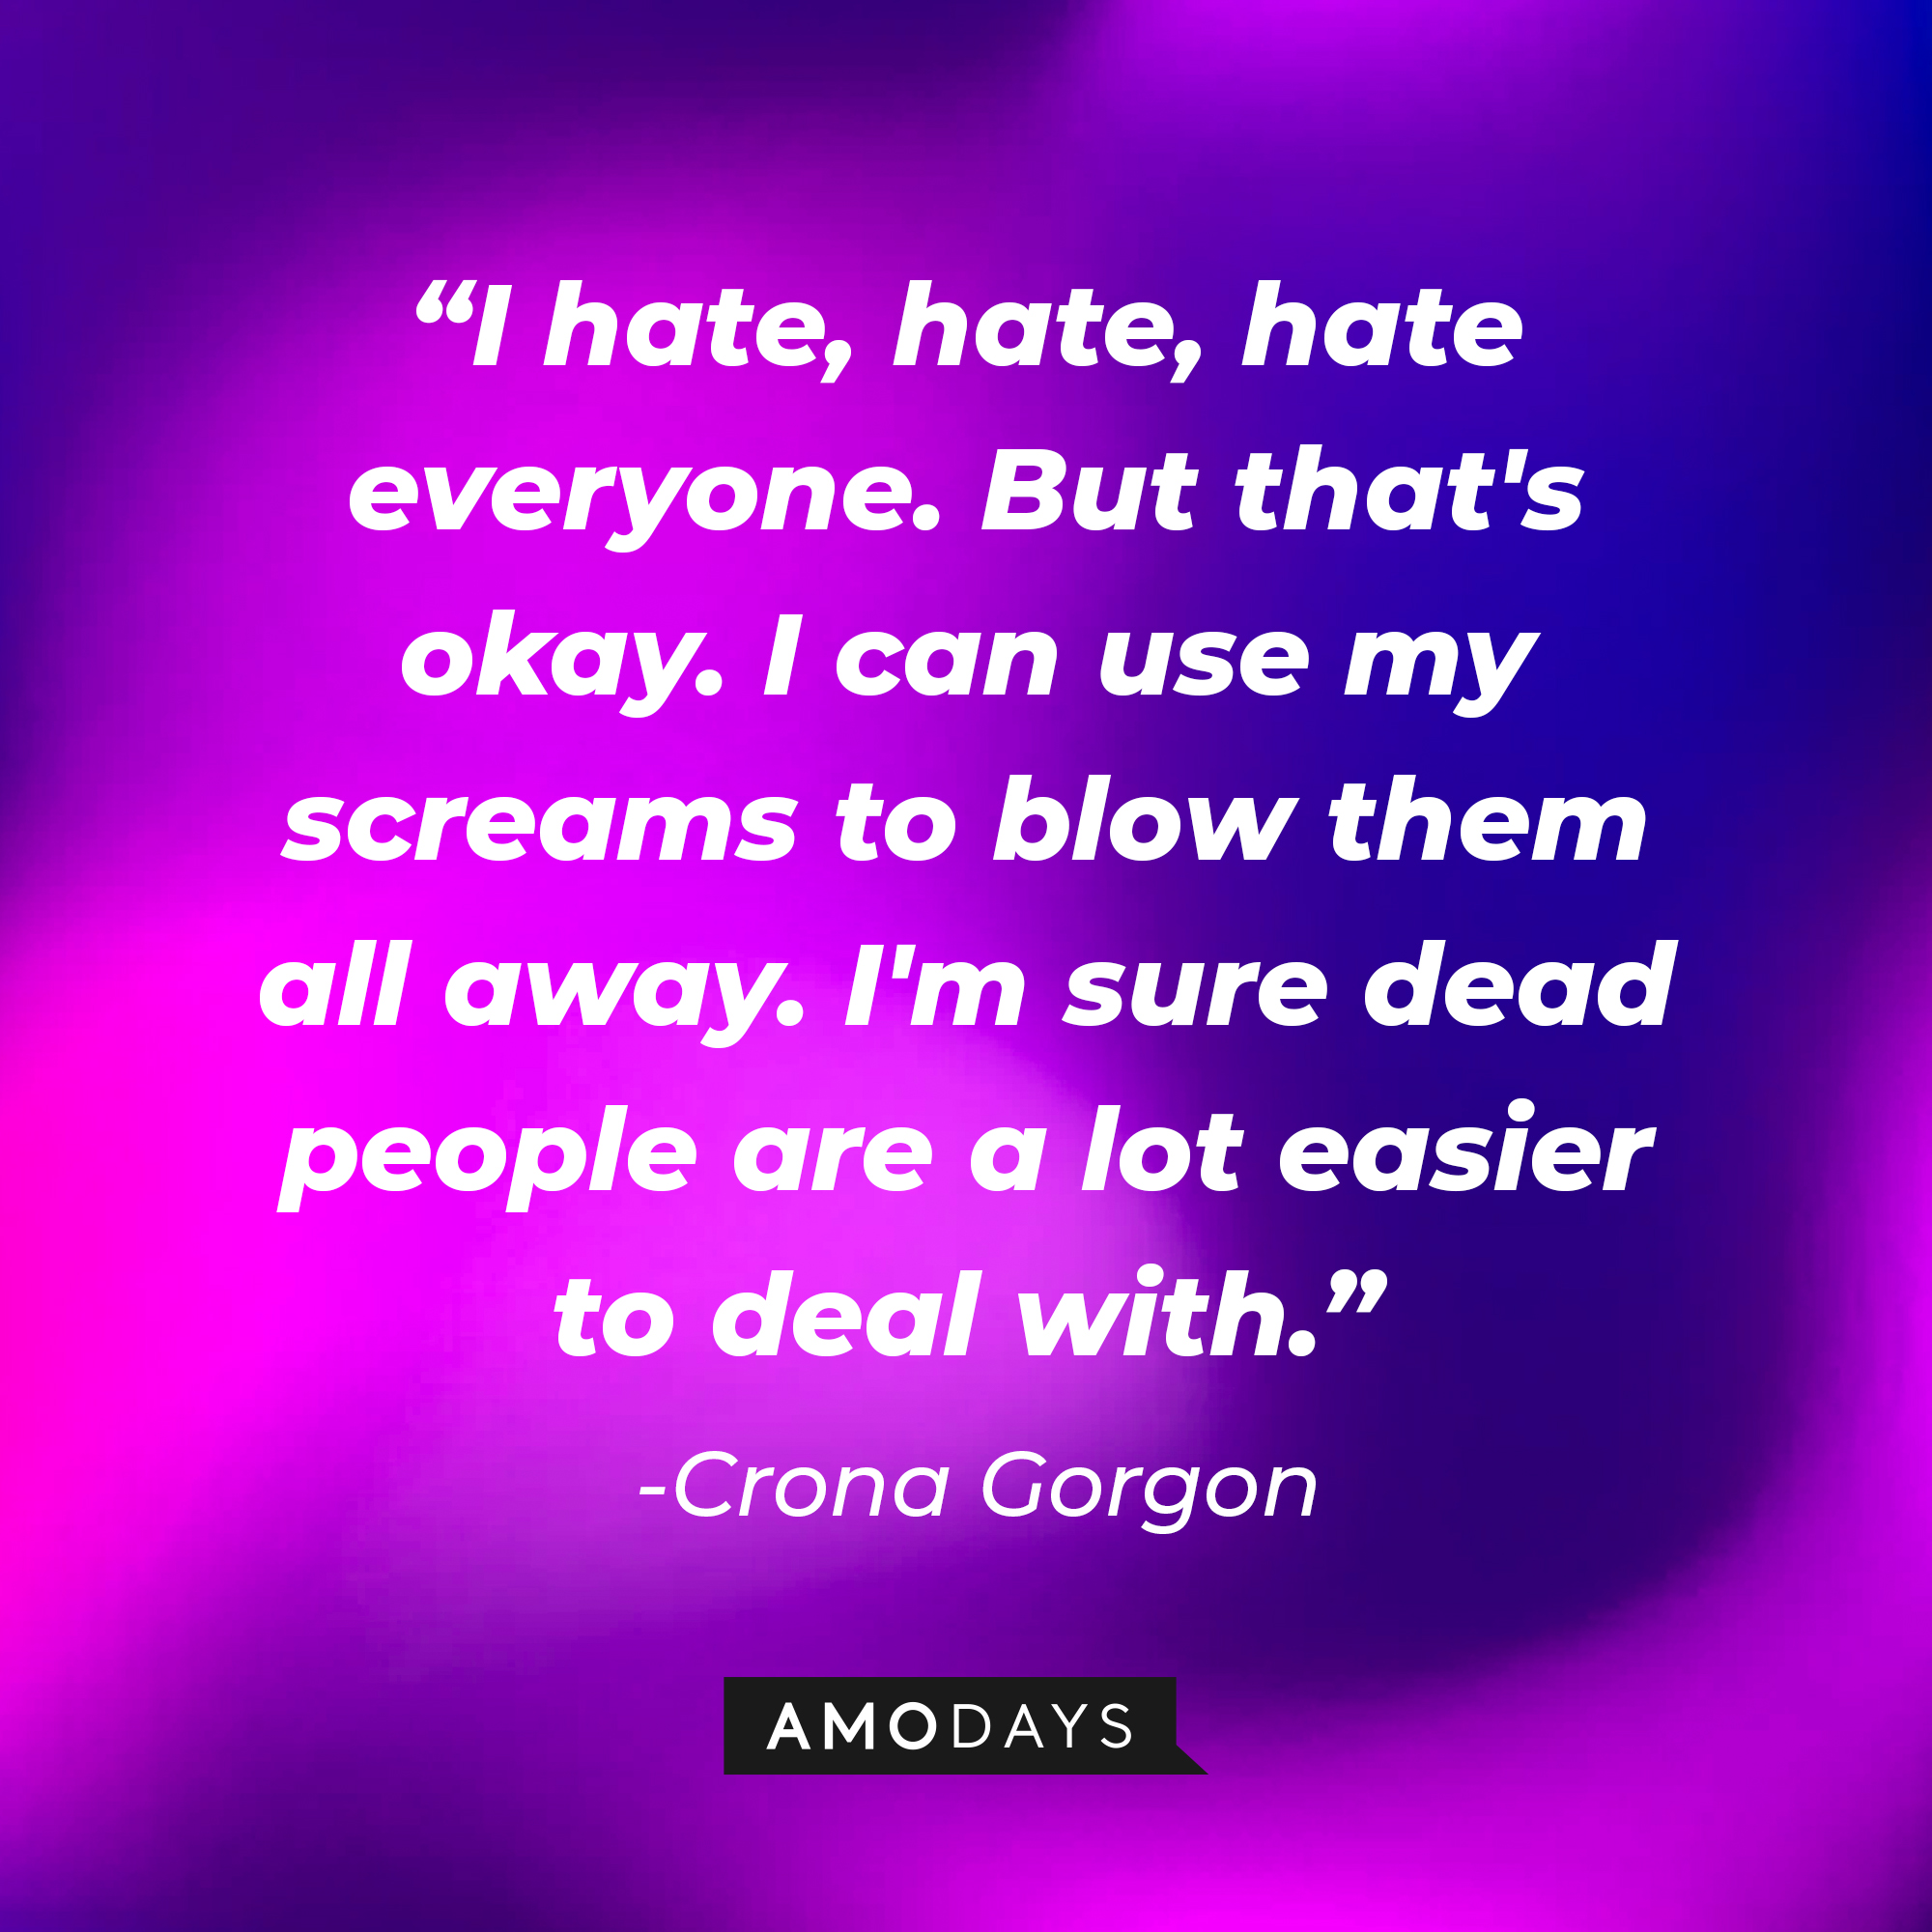 Crona Gorgon’s quote: "I hate, hate, hate everyone. But that's okay. I can use my screams to blow them all away. I'm sure dead people are a lot easier to deal with." | Image: AmoDays